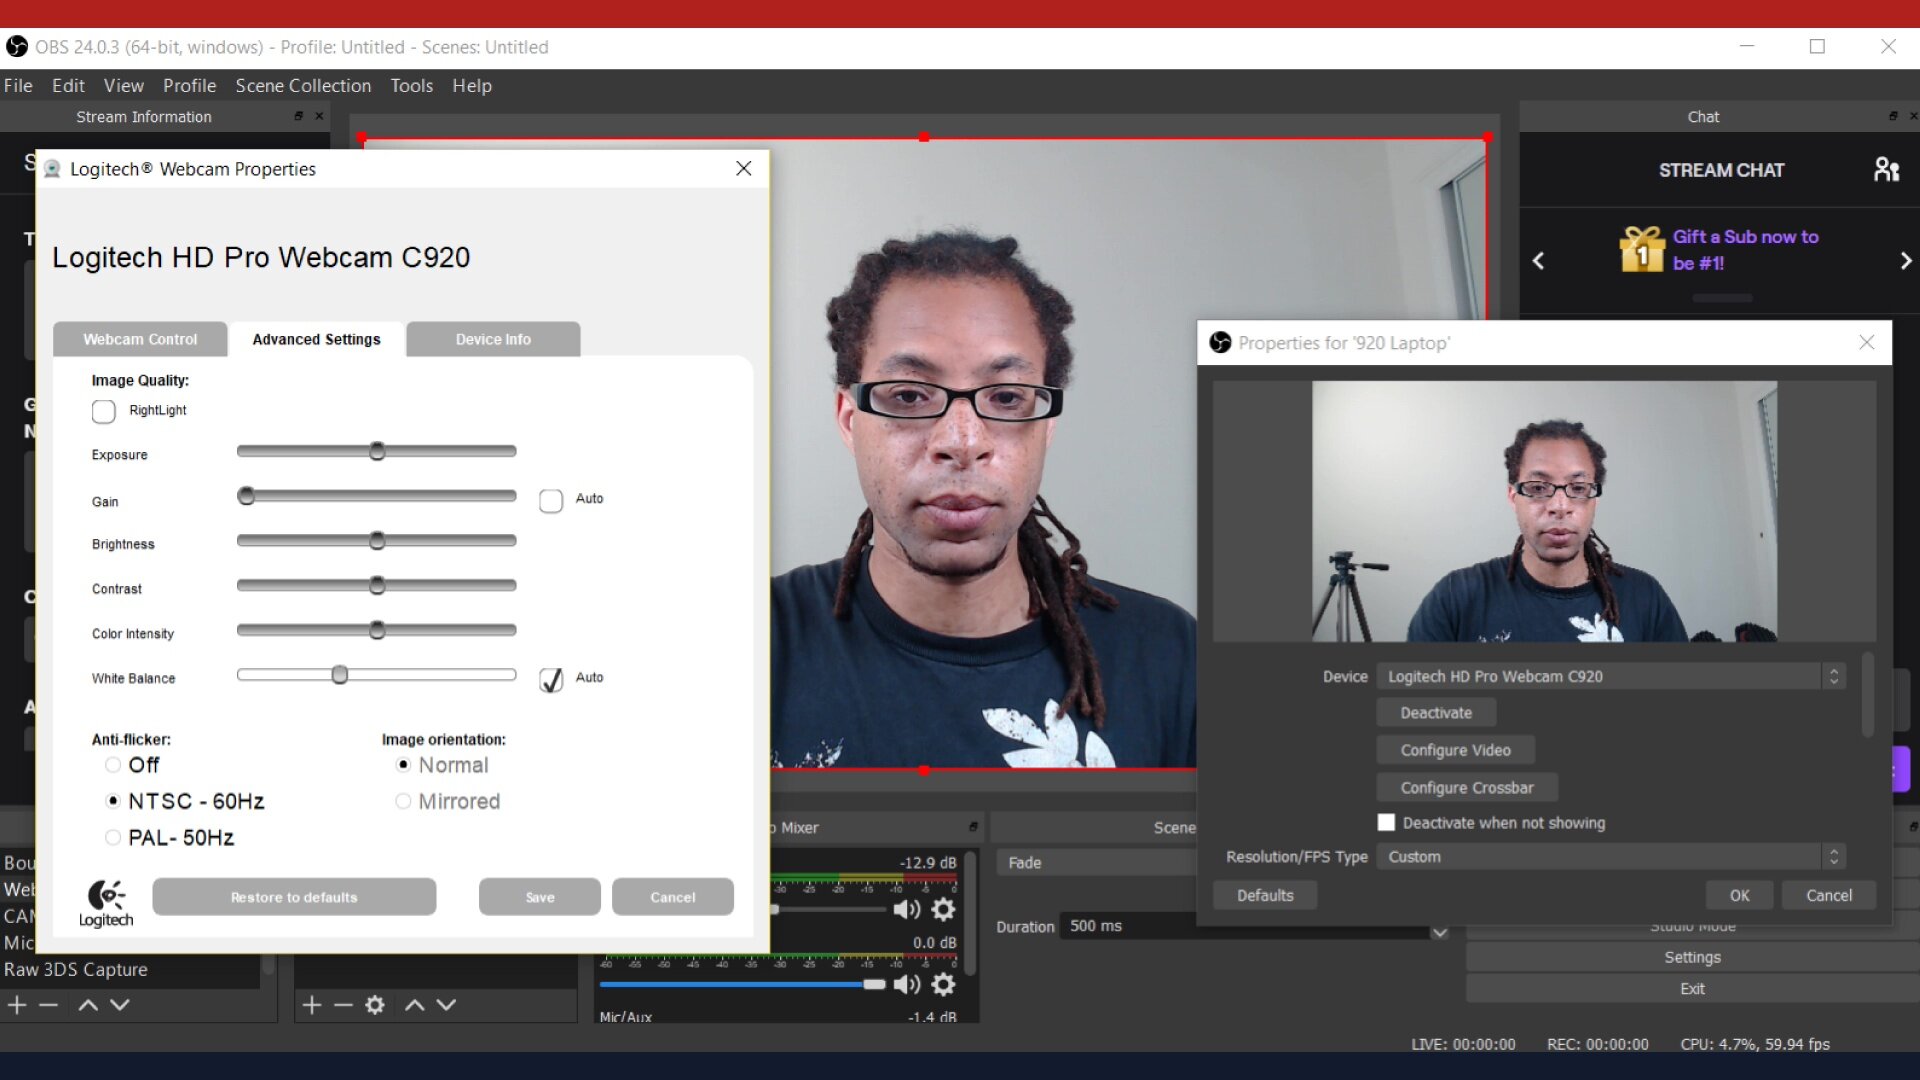 duidelijk extase wandelen 5 Ways to Improve your Webcam Quality [for Zoom, Twitch, YouTube] — Stream  Tech Reviews by BadIntent